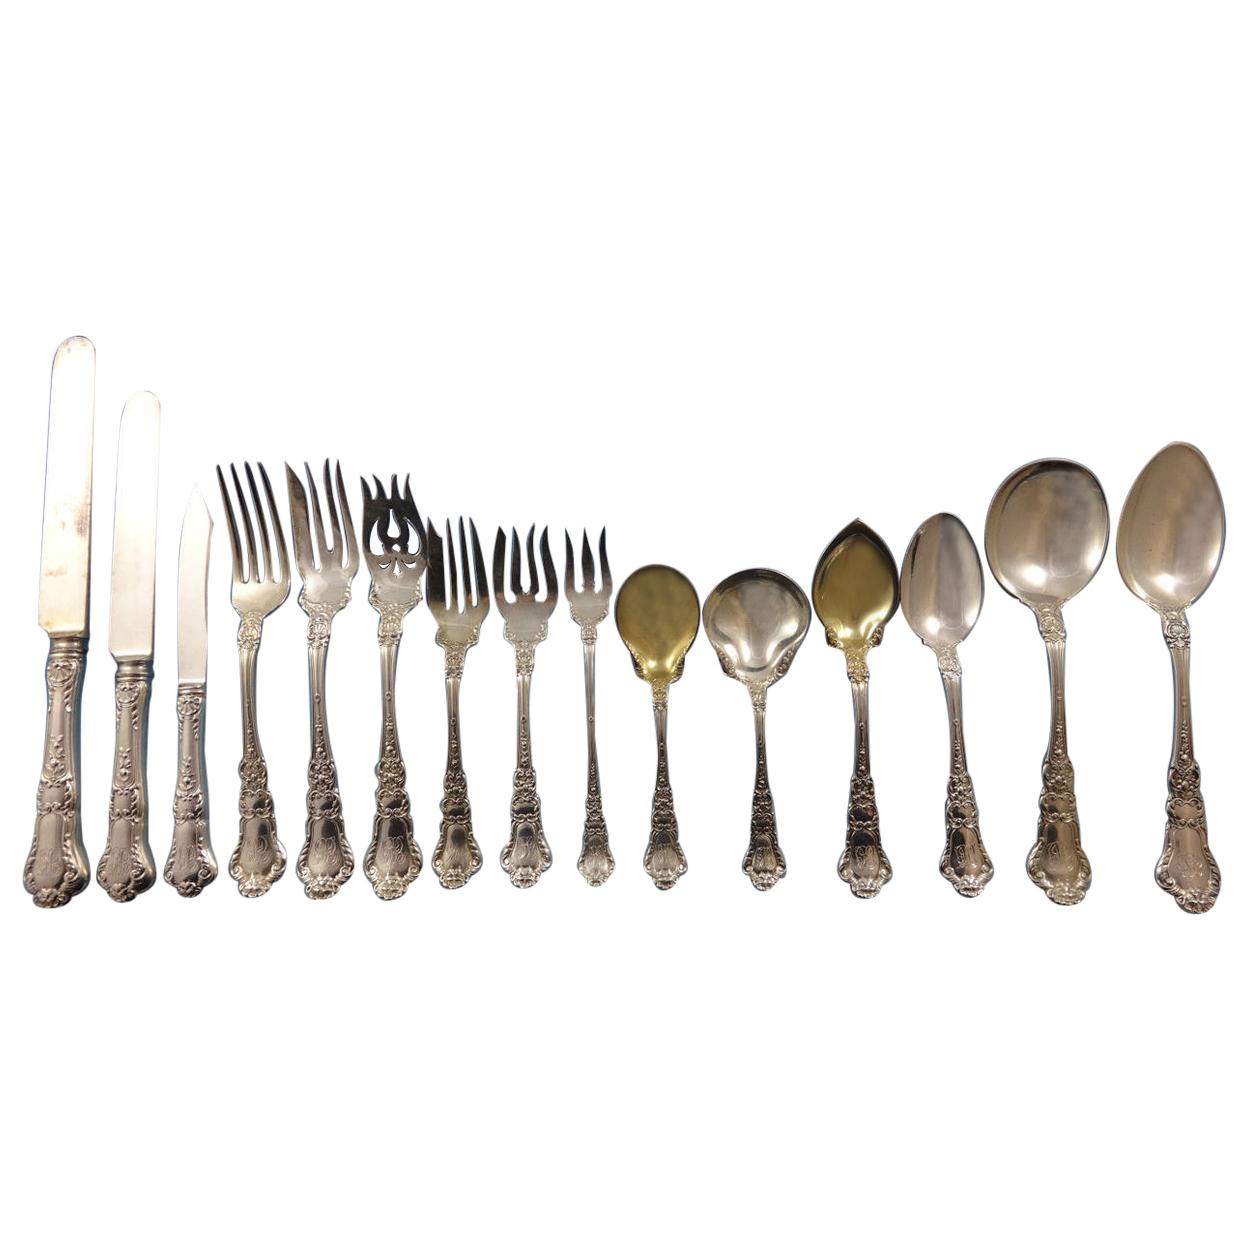 Baronial Old by Gorham Sterling Silver Flatware Set 12 Service, 144 Pieces